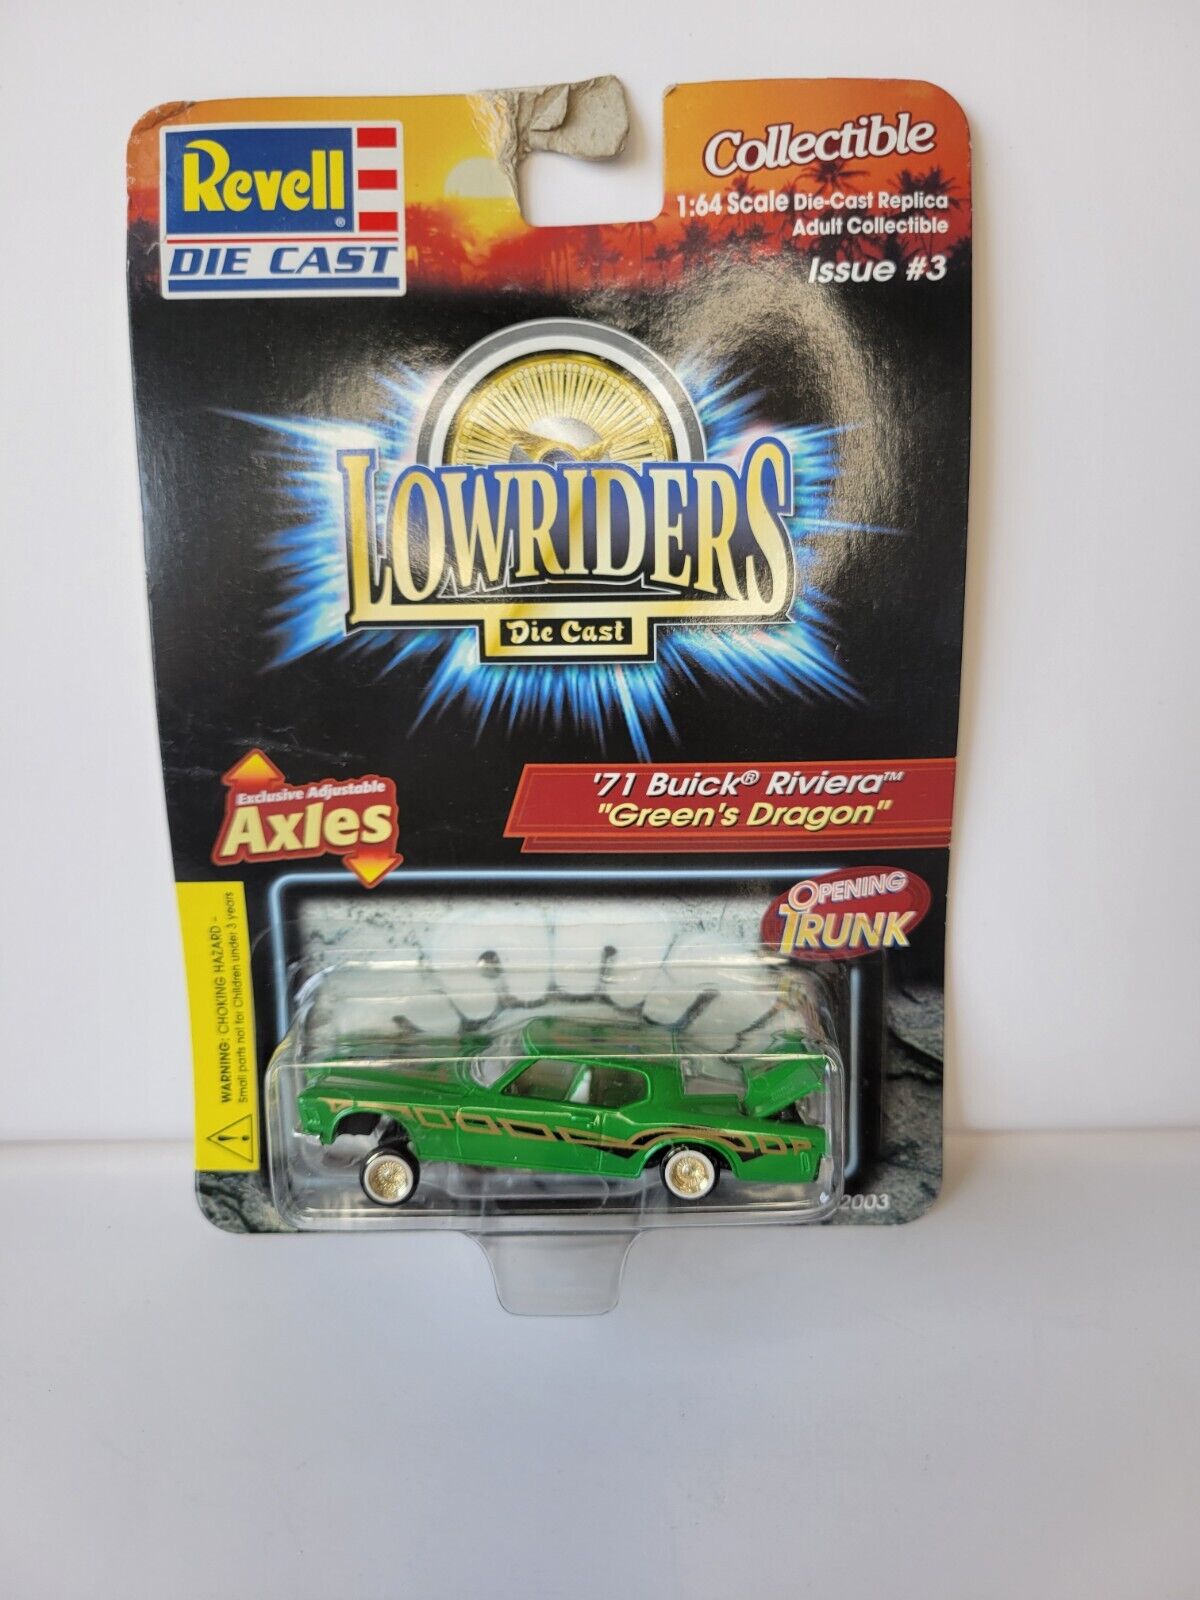 Revell Lowriders '71 Buick Riviera "Green's Dragon" Issue #3